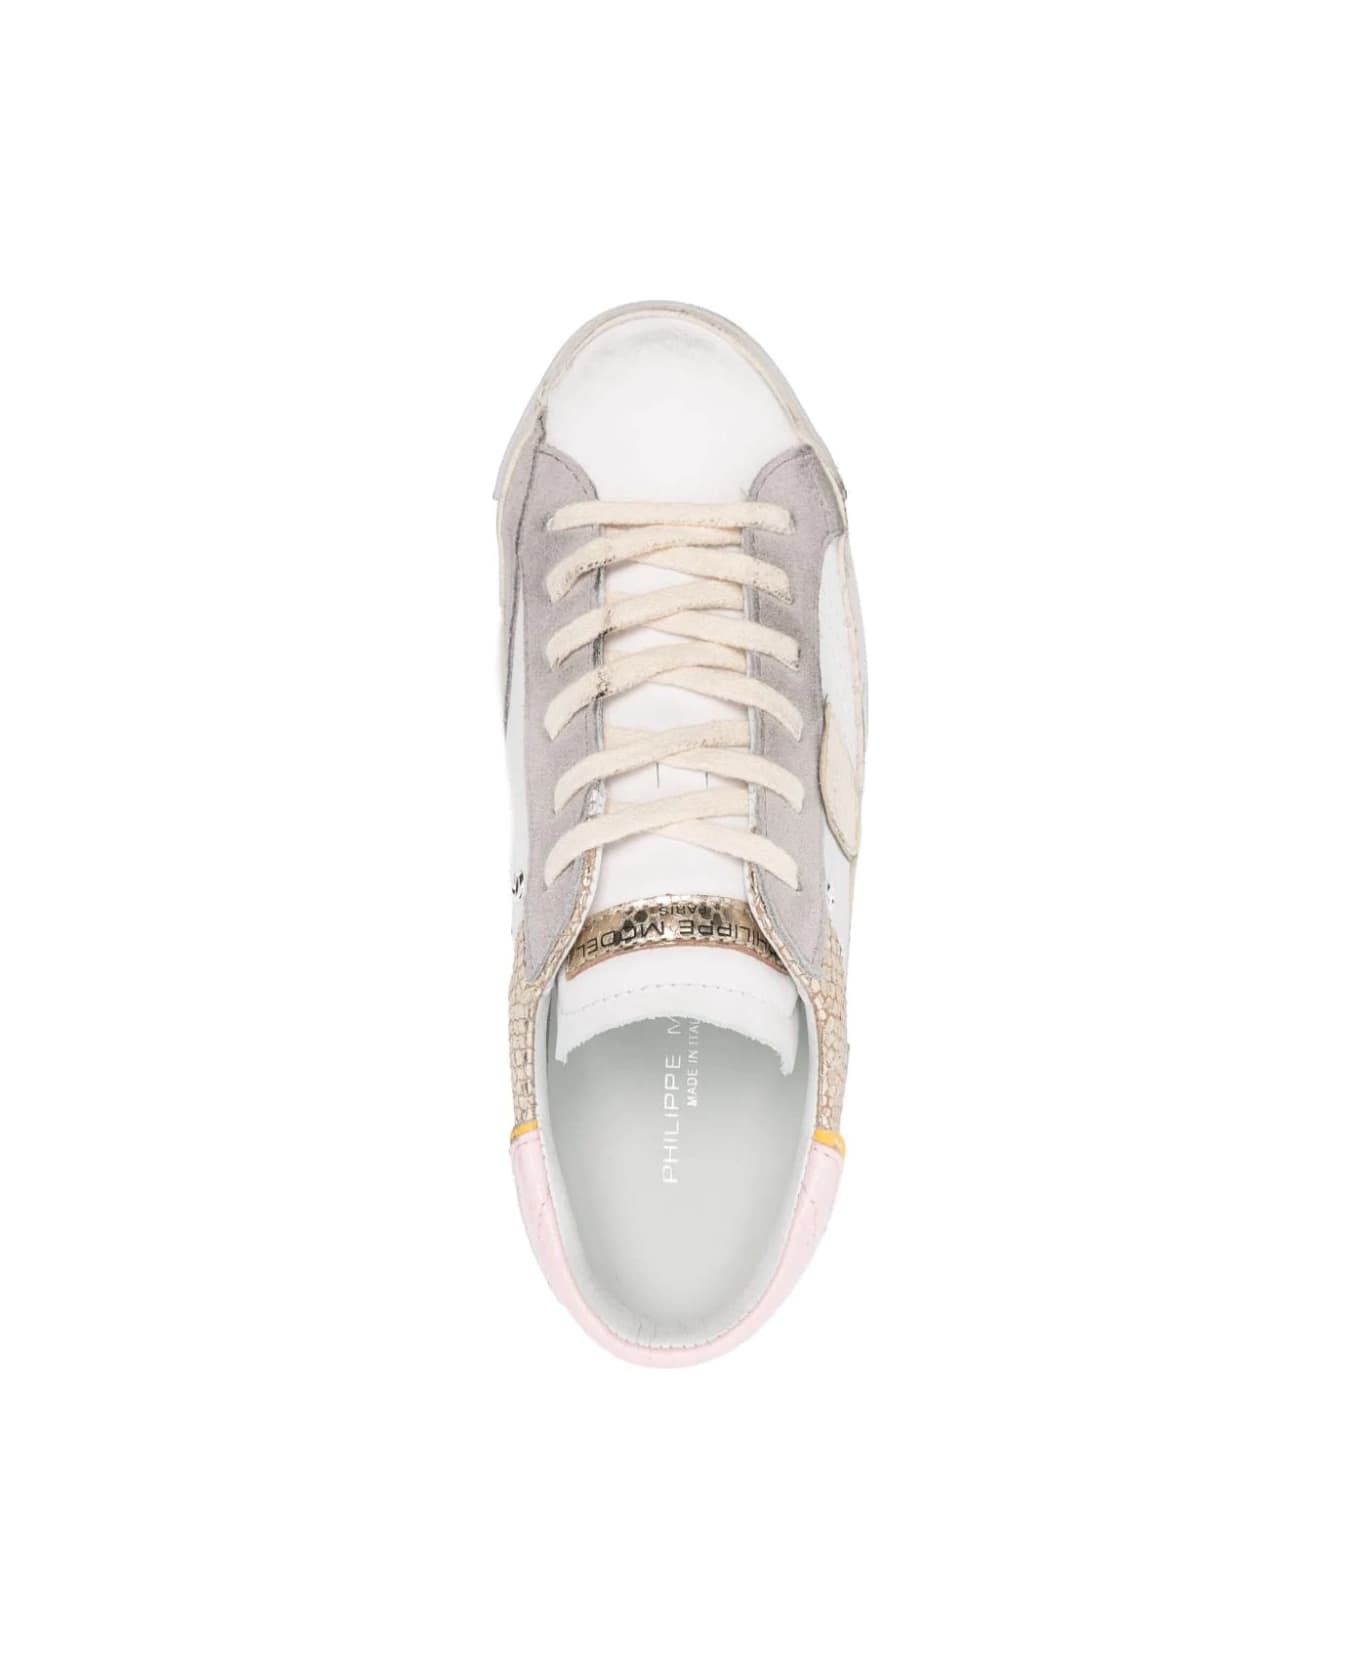 Philippe Model Prsx Low Sneakers - White, Animalier And Gold - Multicolour